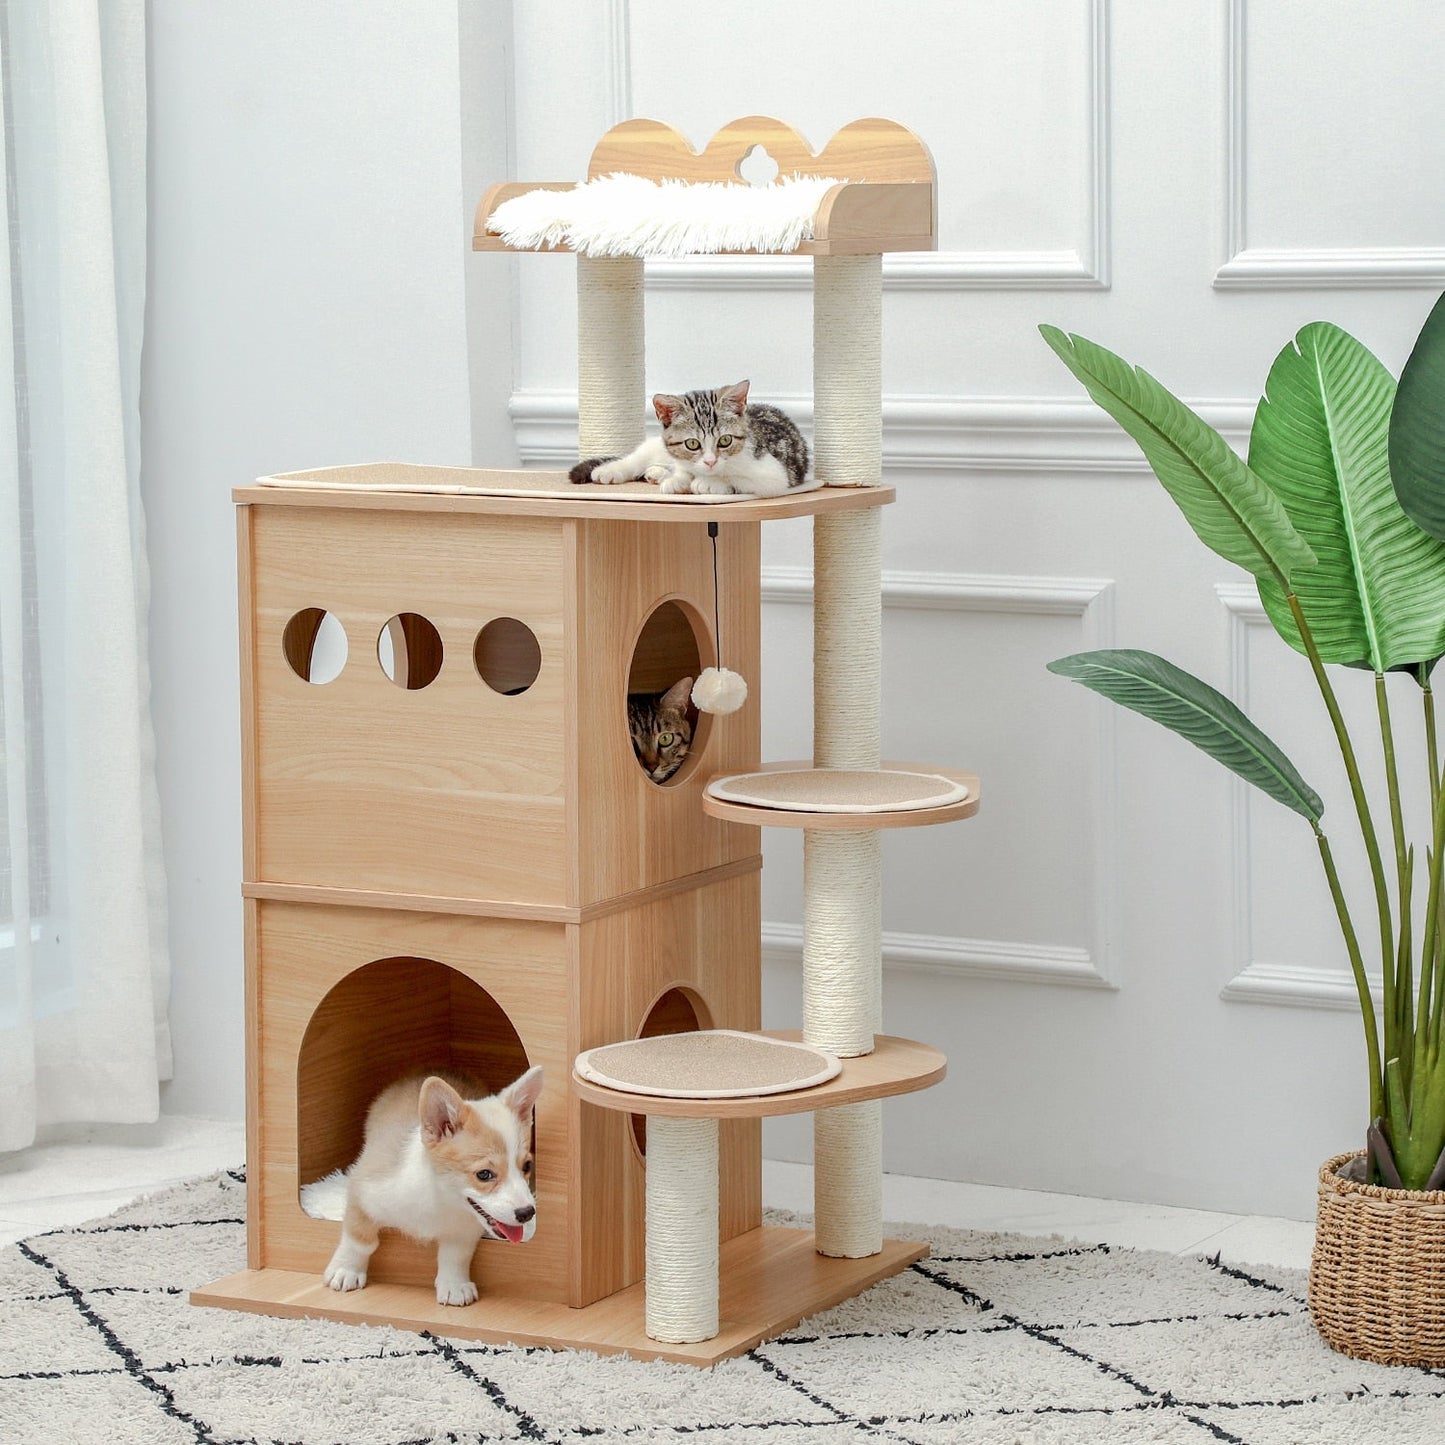 a modern cat tree in beige color for cats and dogs